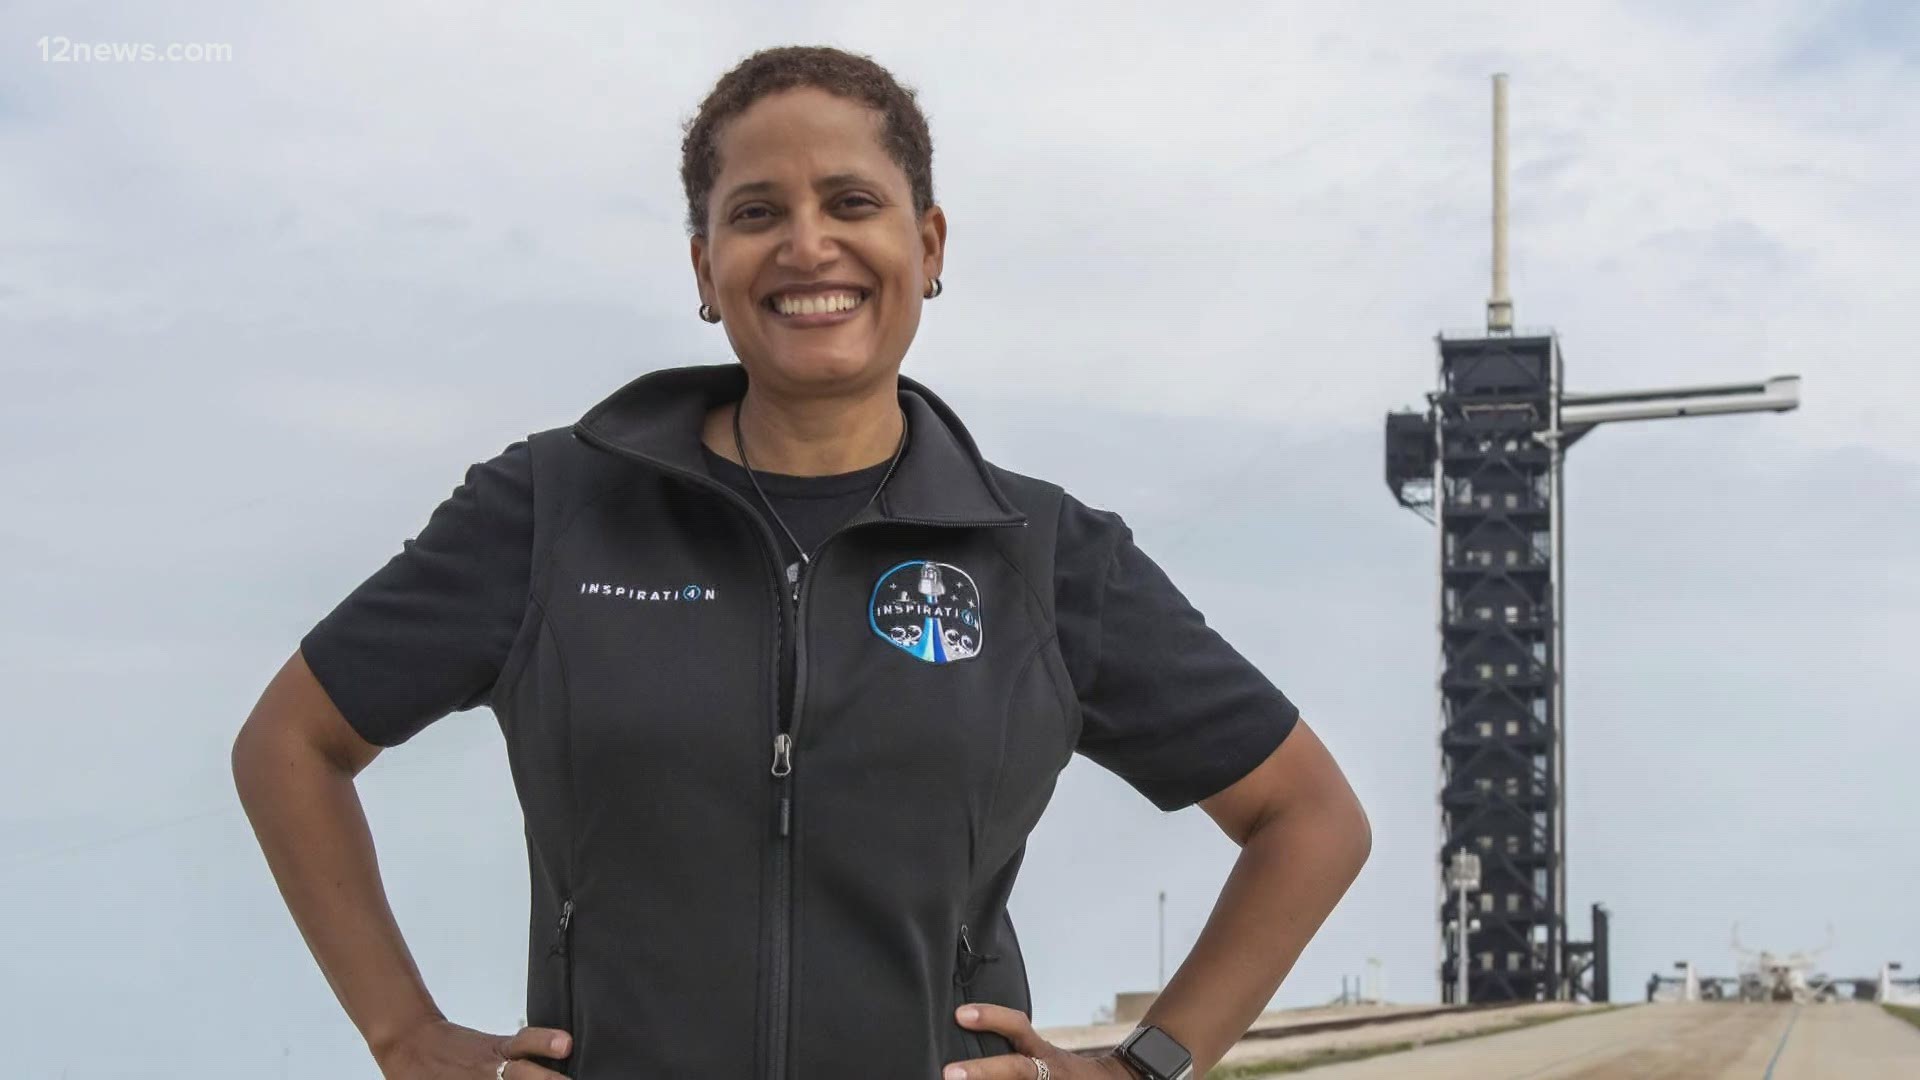 Dr. Sian Proctor, a professor at South Mountain Community College, has been chosen to be part of SpaceX first all-civilian mission to space.